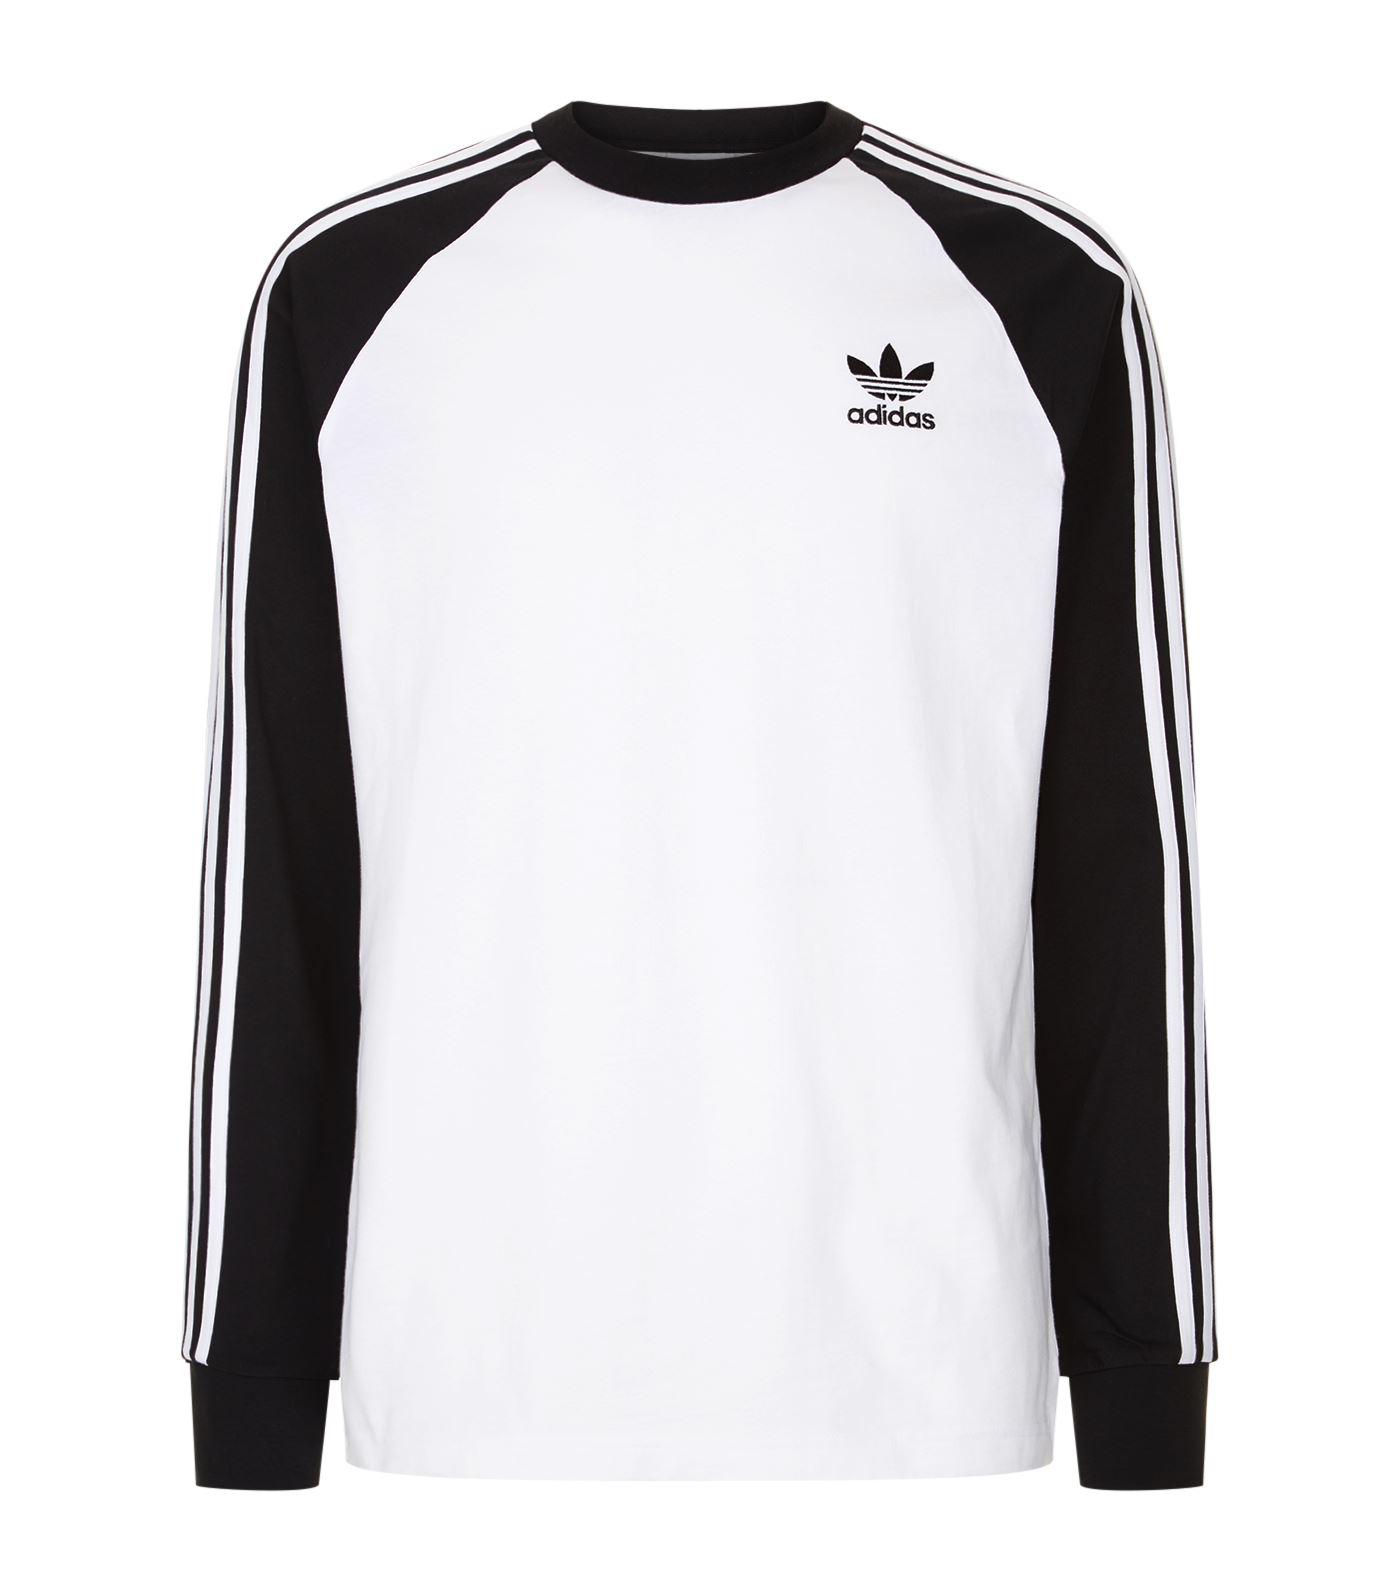 Lyst - Adidas Originals Long Sleeve Top In White Dh5793 in White for